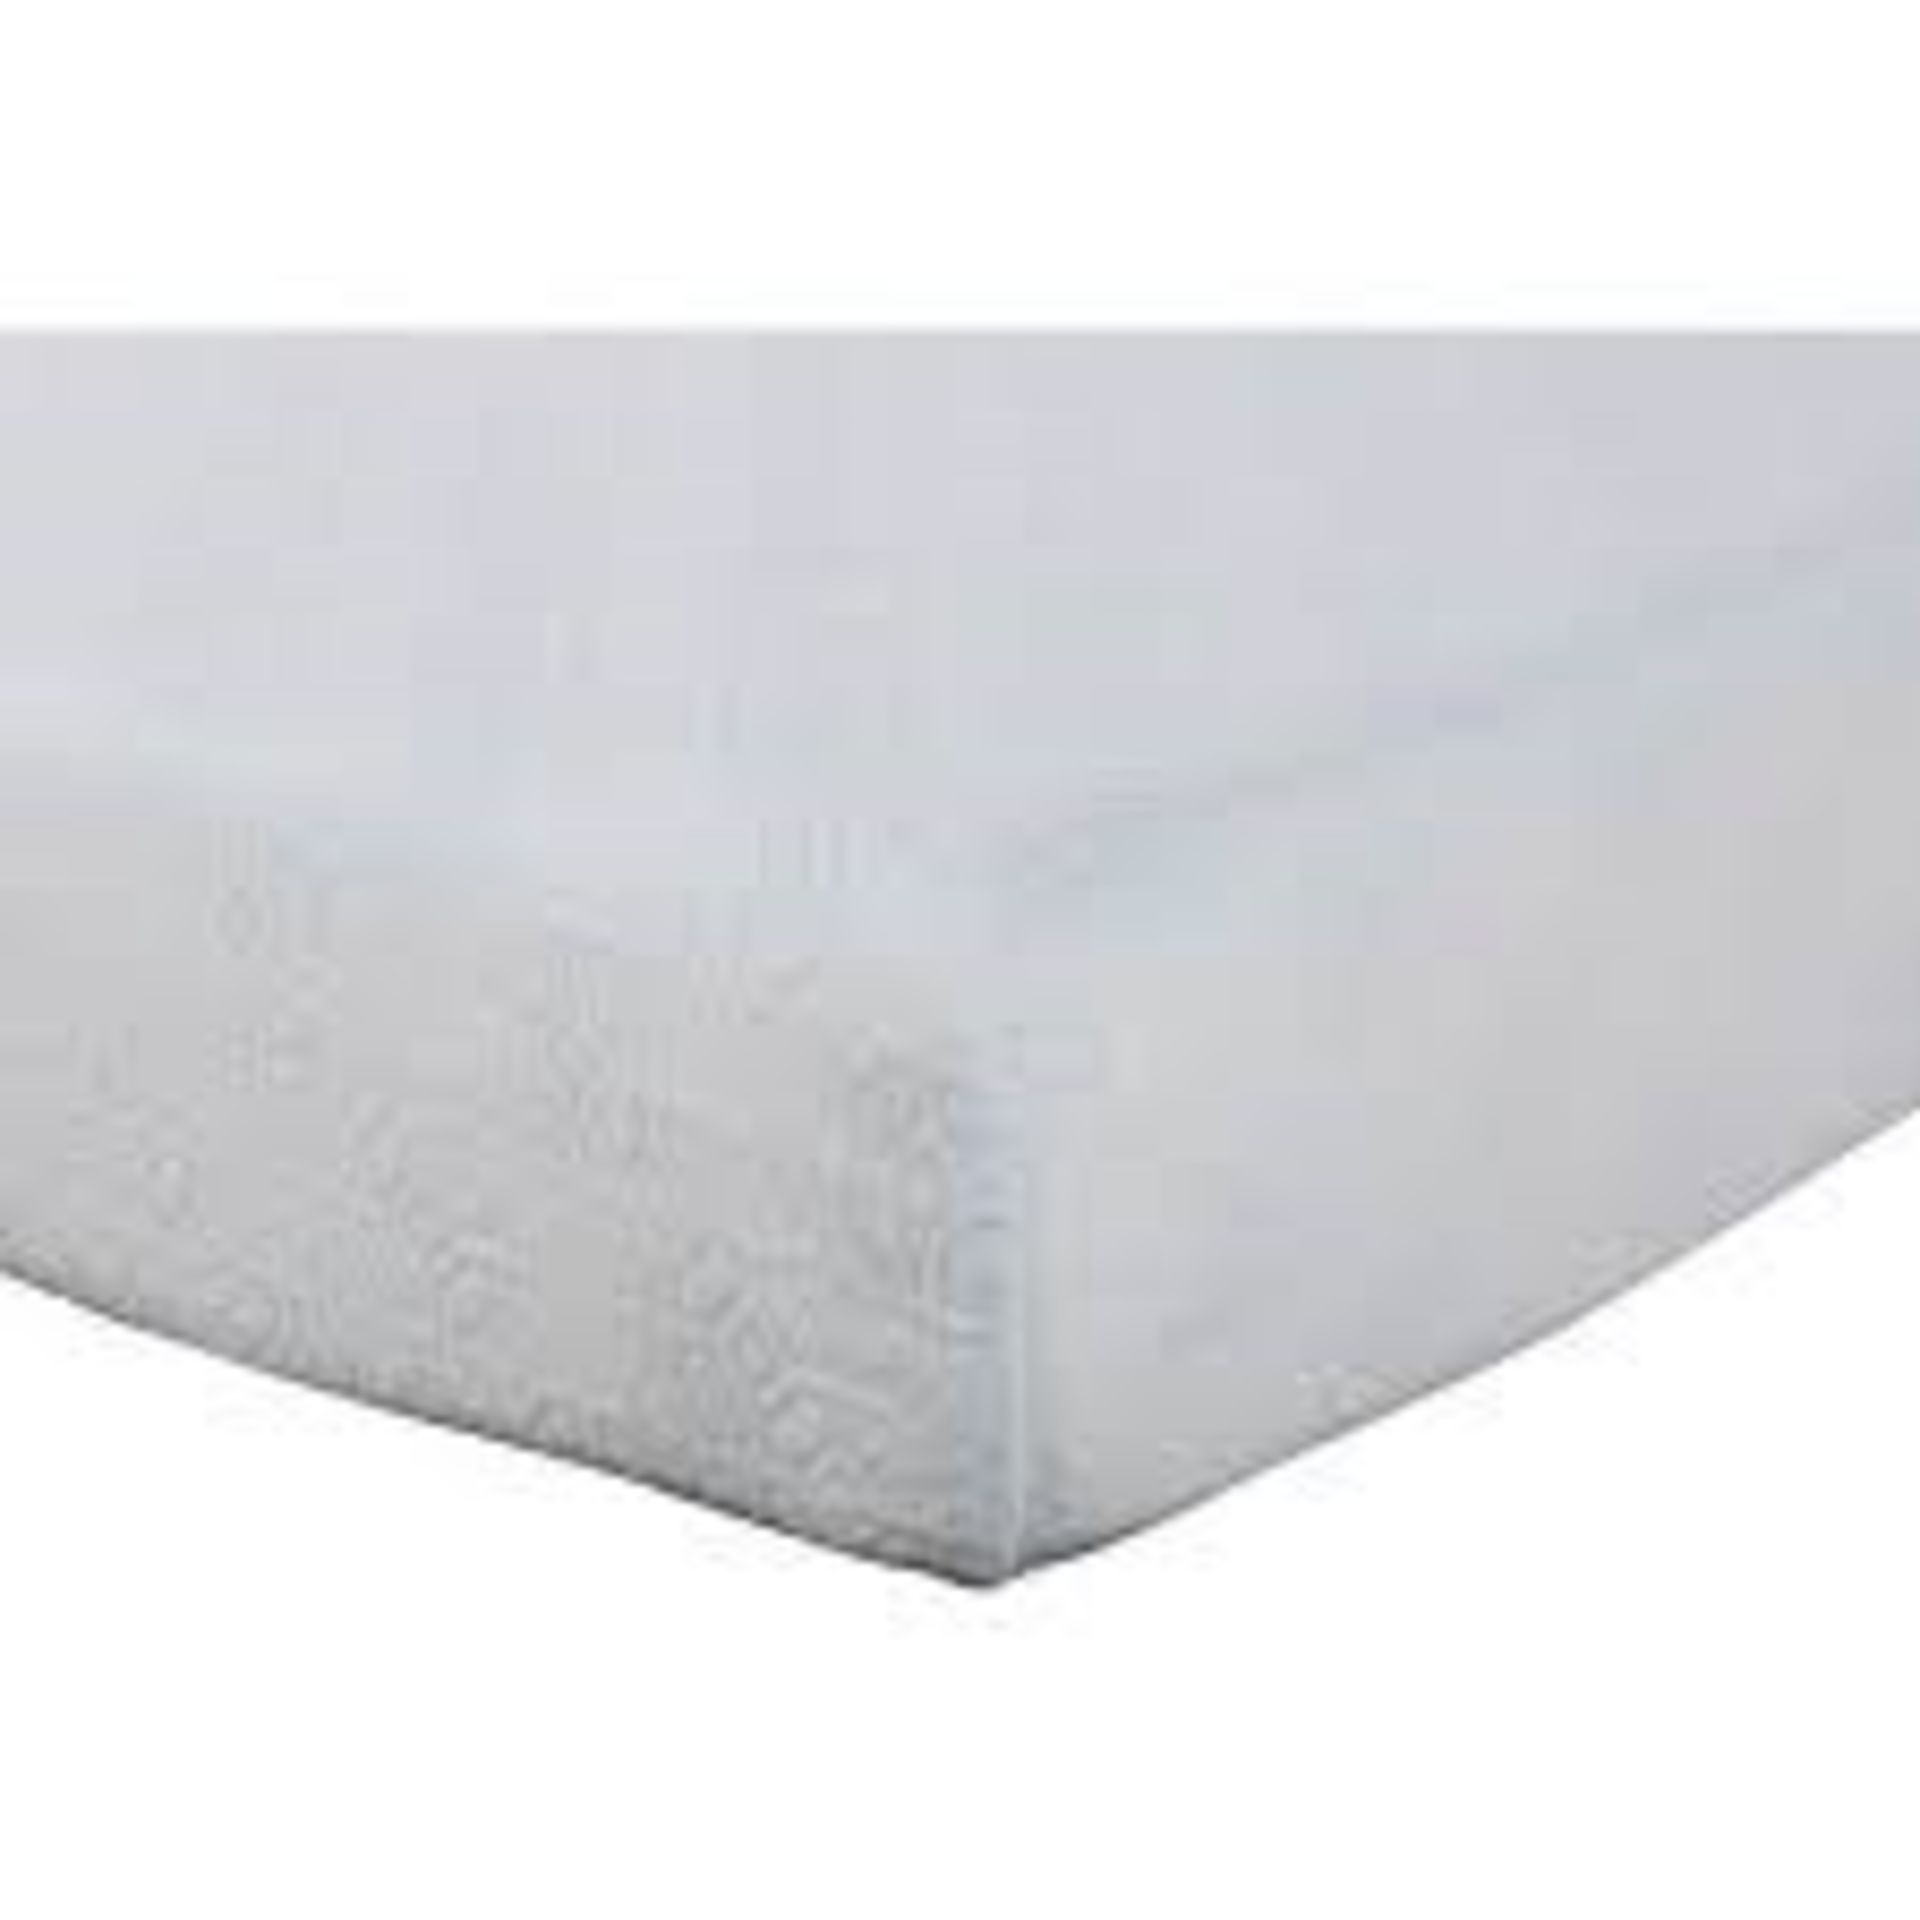 Bagged Ready Rolled Designer Mattress RRP £280 (17035) (Public Viewing and Appraisals Available)